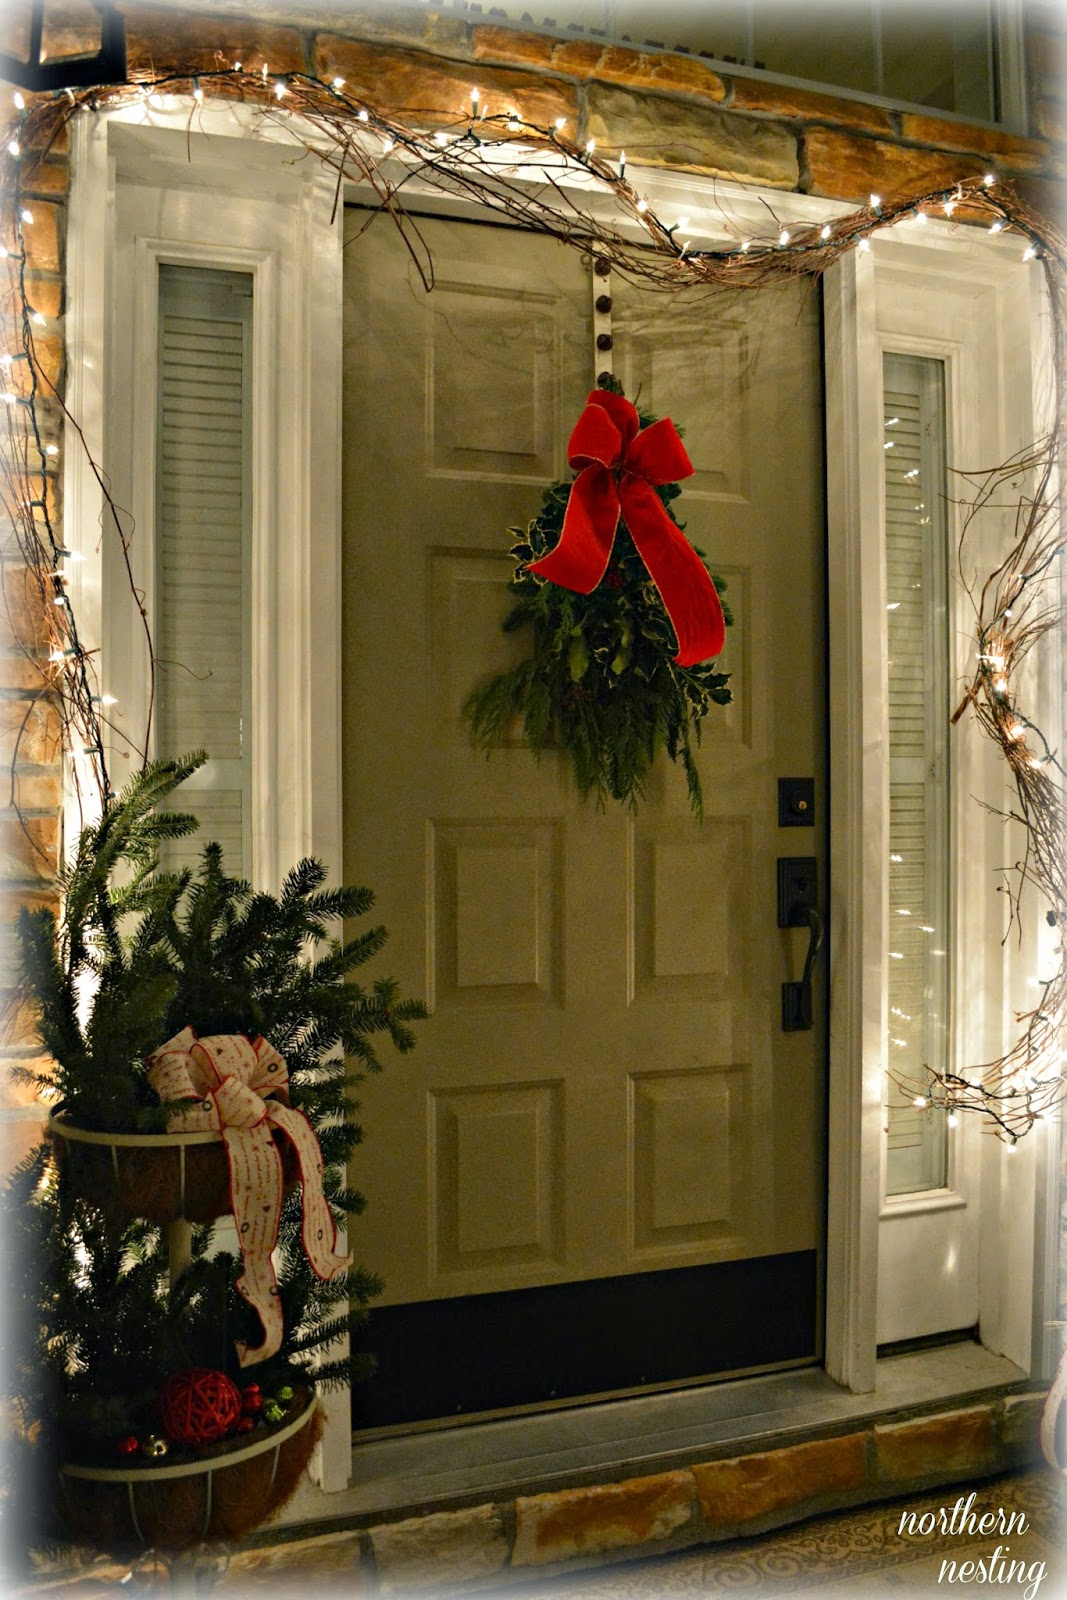 Northern Nesting: Welcome...Christmas in the Entry